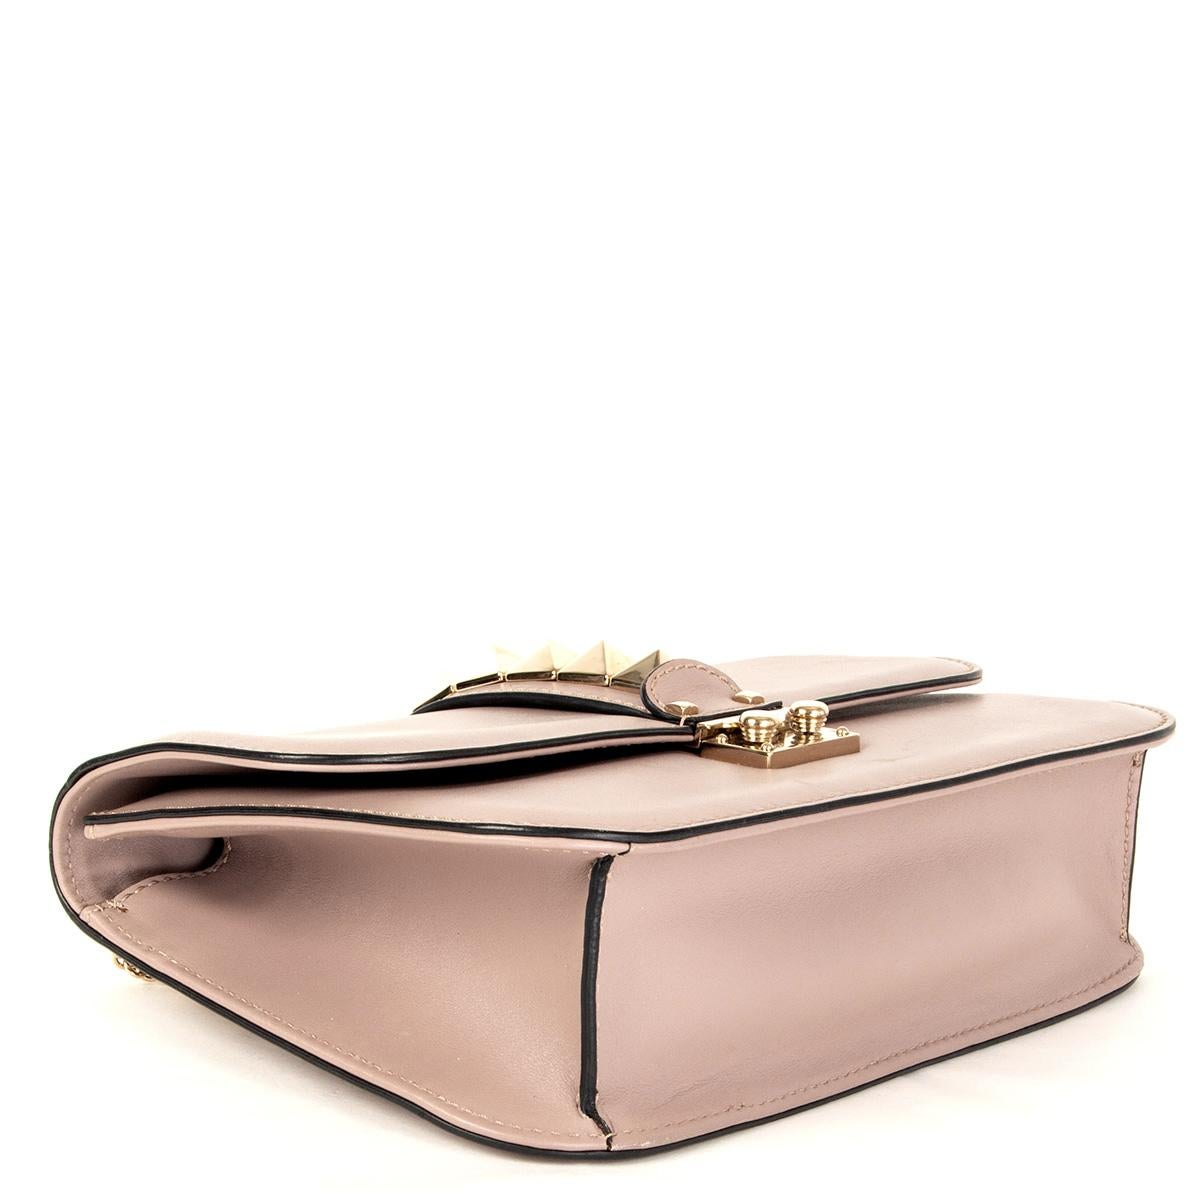 100% authentic Valentino Rockstud Glam Lock flap bag in powder rose calfskin features edgy, oversized pyramid studs in light gold-tone. A chain-link pull-through strap can be used as a shoulder strap, worn across the body, or removed to carry this